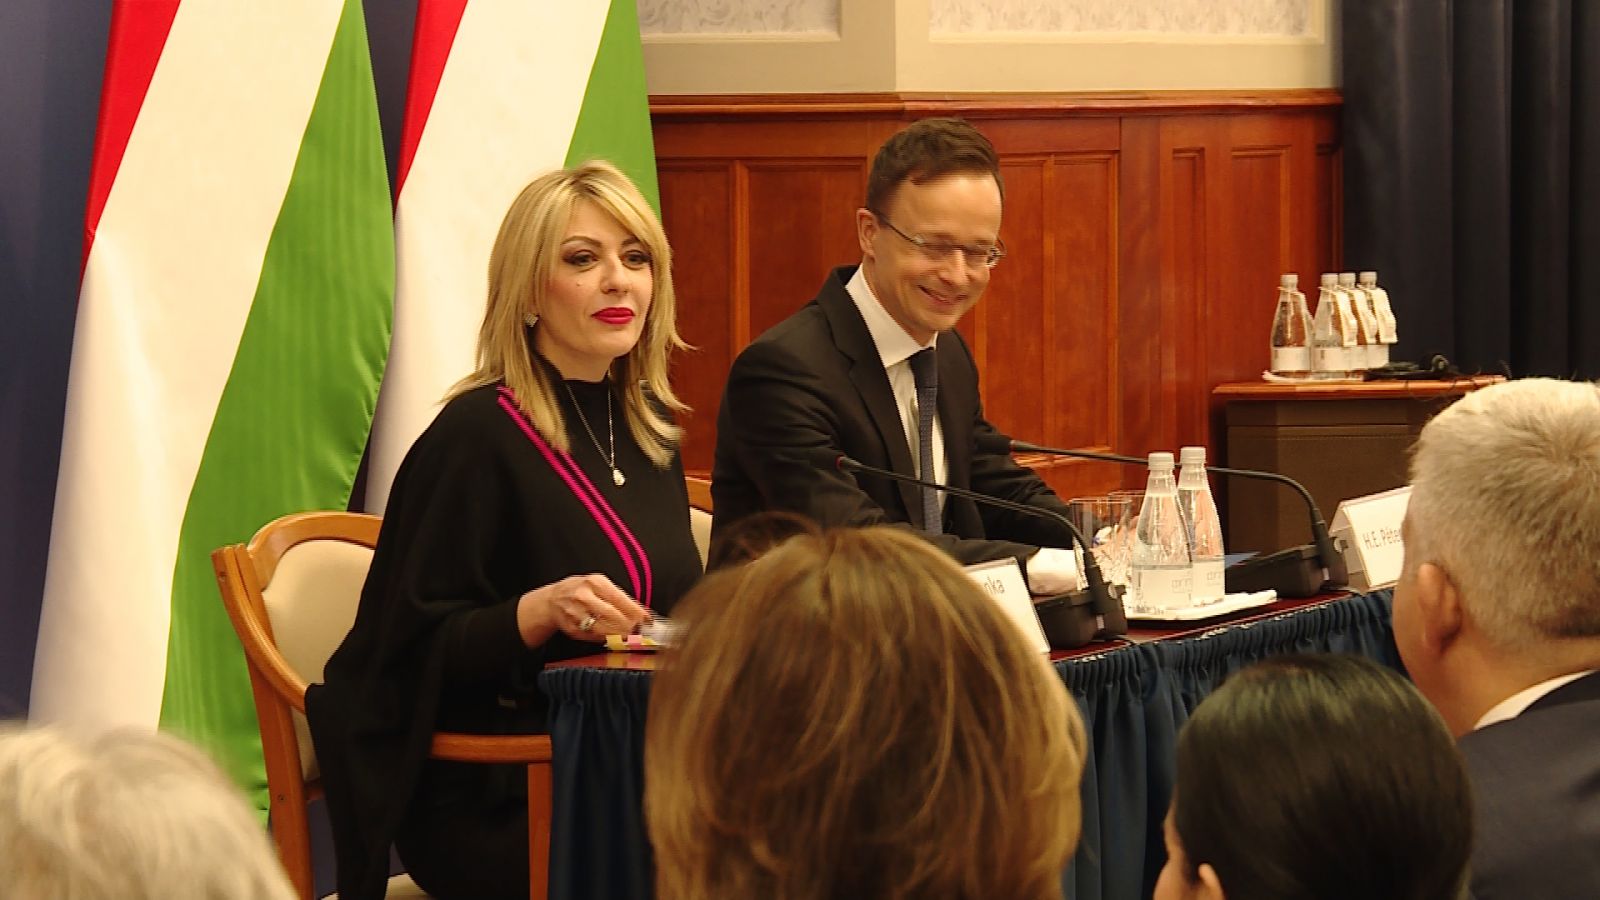 J. Joksimović: Hungary, supporting Serbia loudly and concretely on its European path